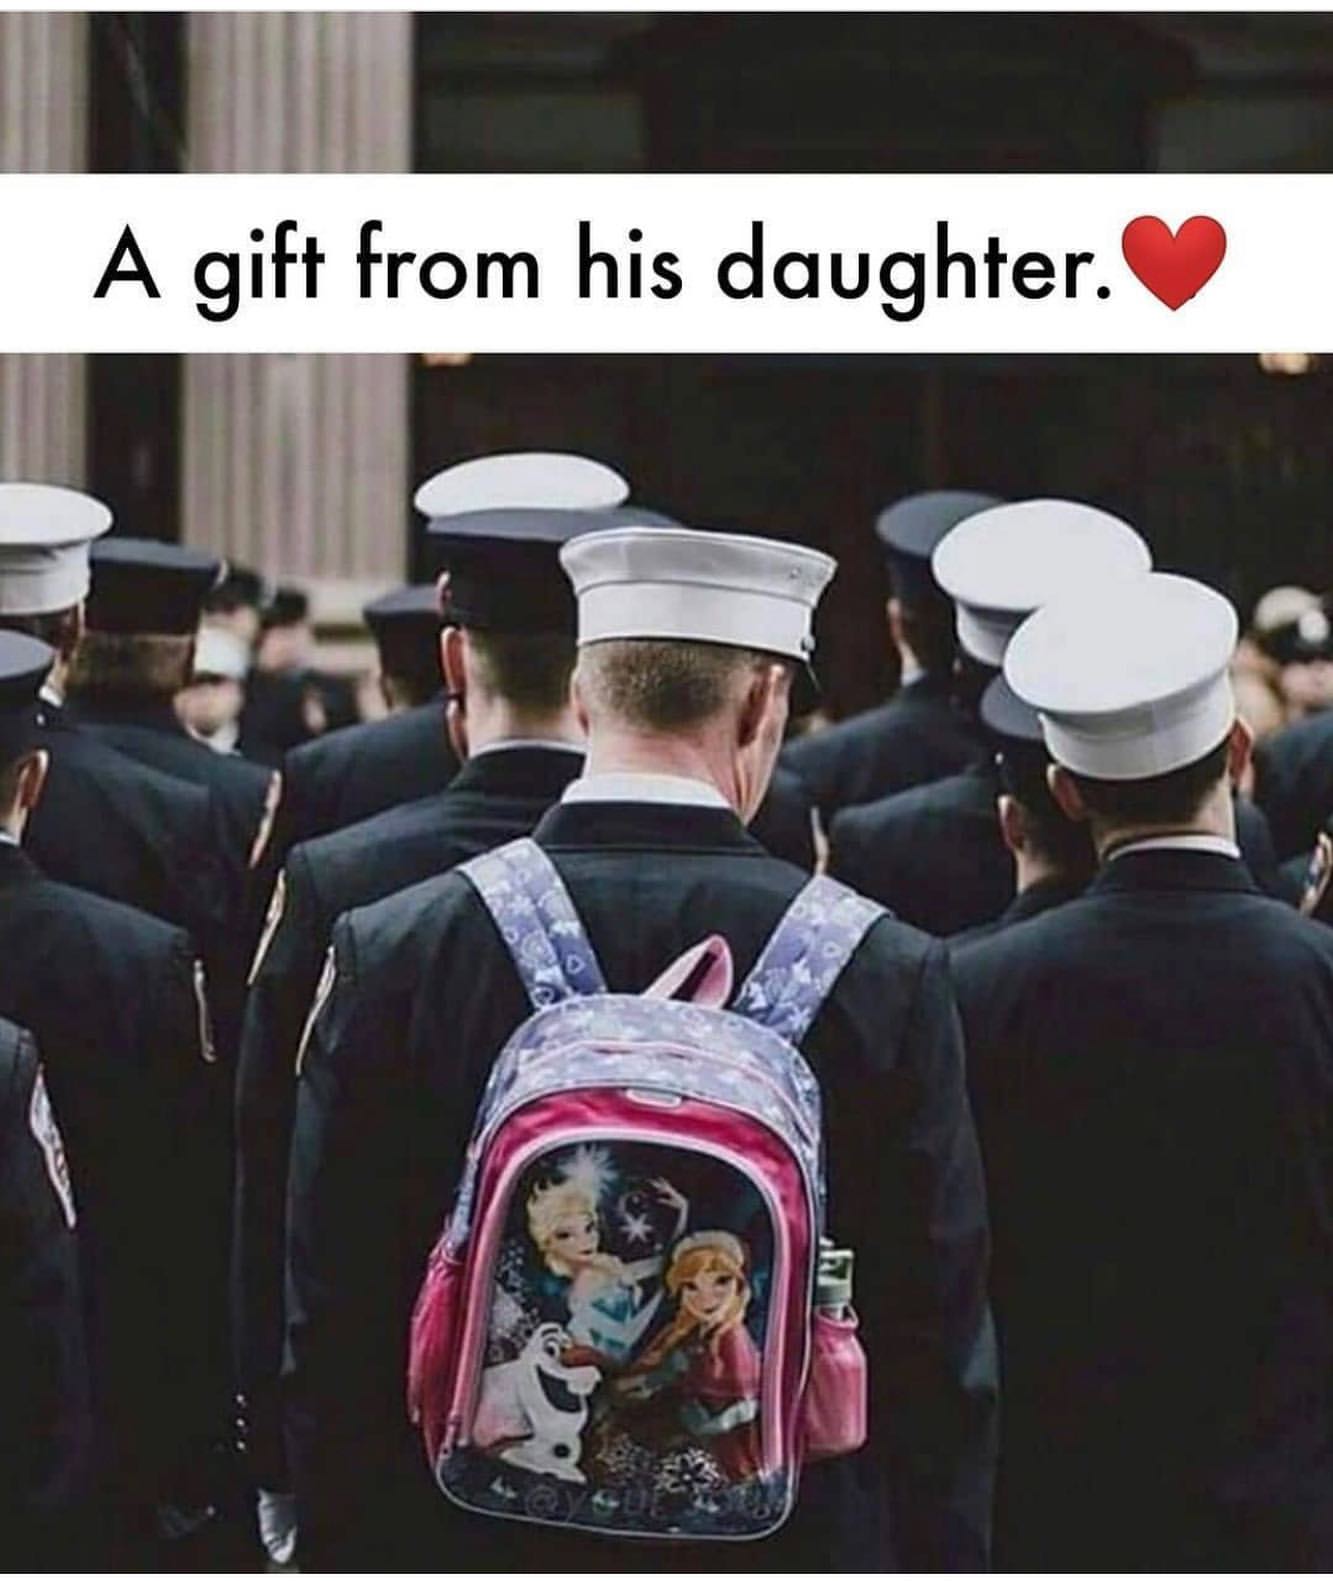 A gift from his daughter.